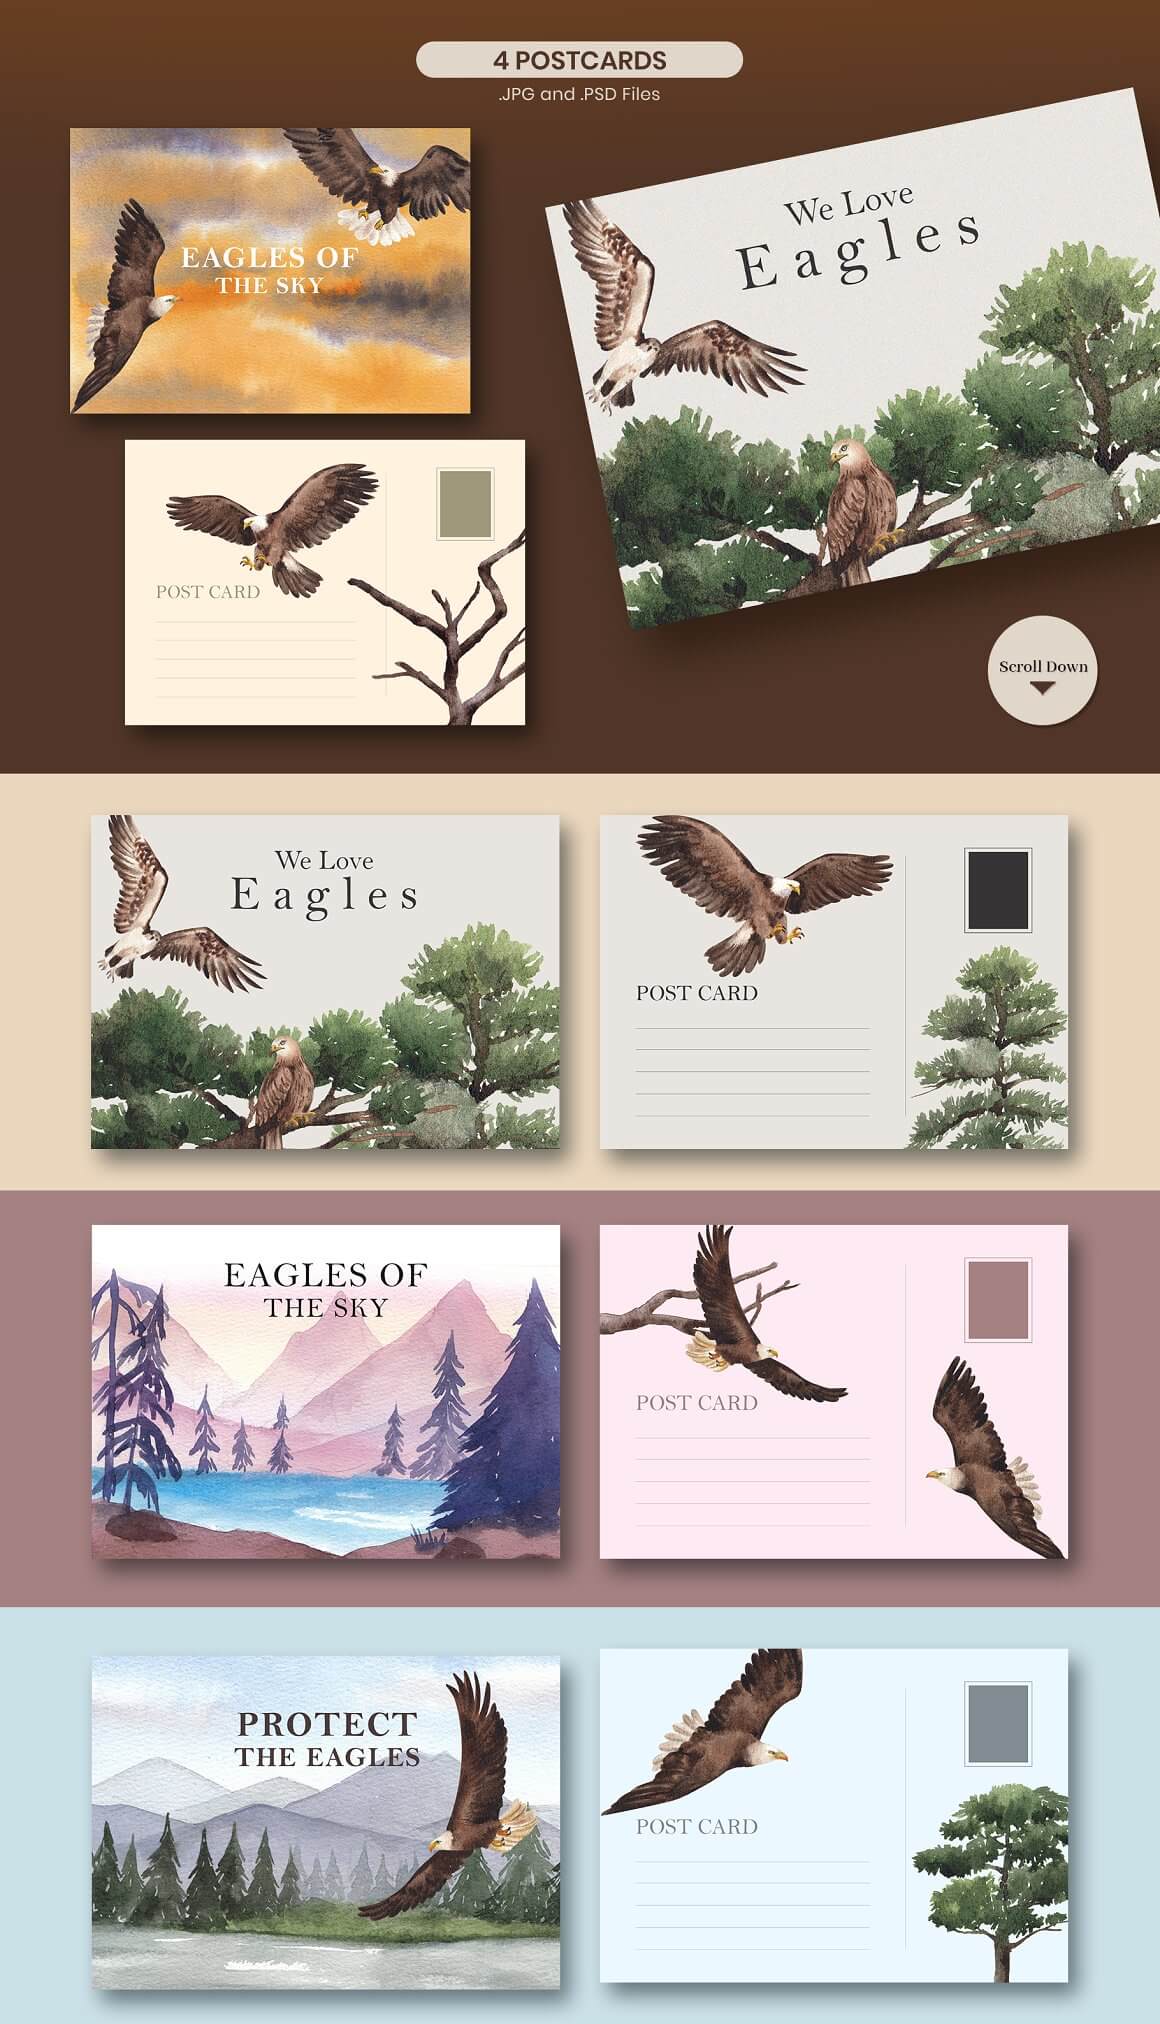 4 watercolor postcards of eagles and nature in beige and pink.